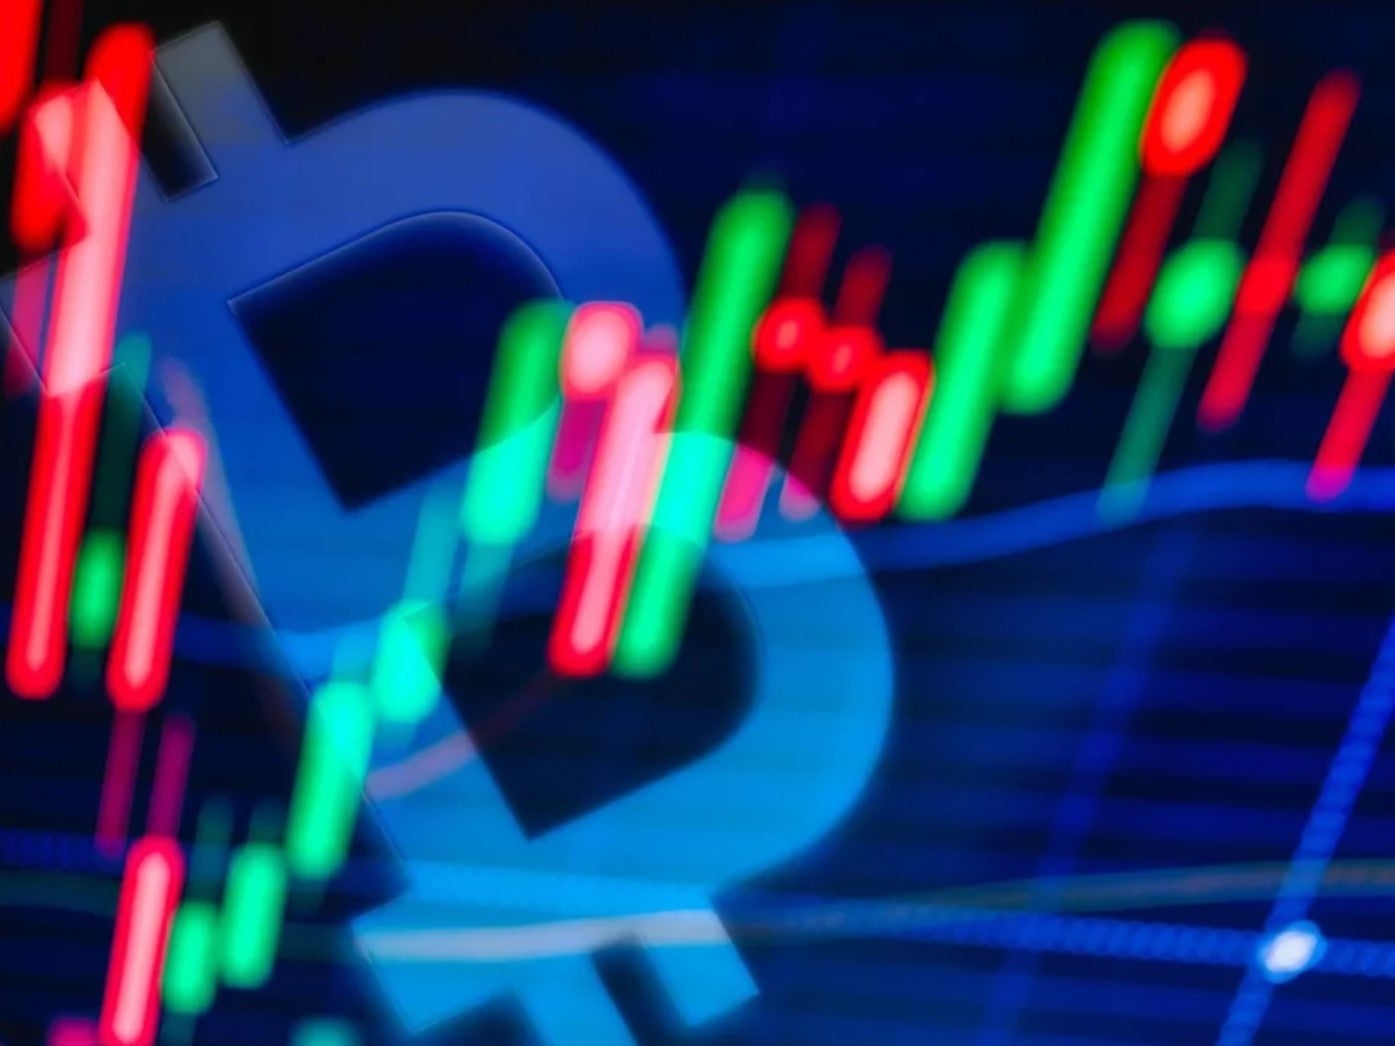 At the start of 2022, bitcoin saw its longest continuous price decline since August 2018